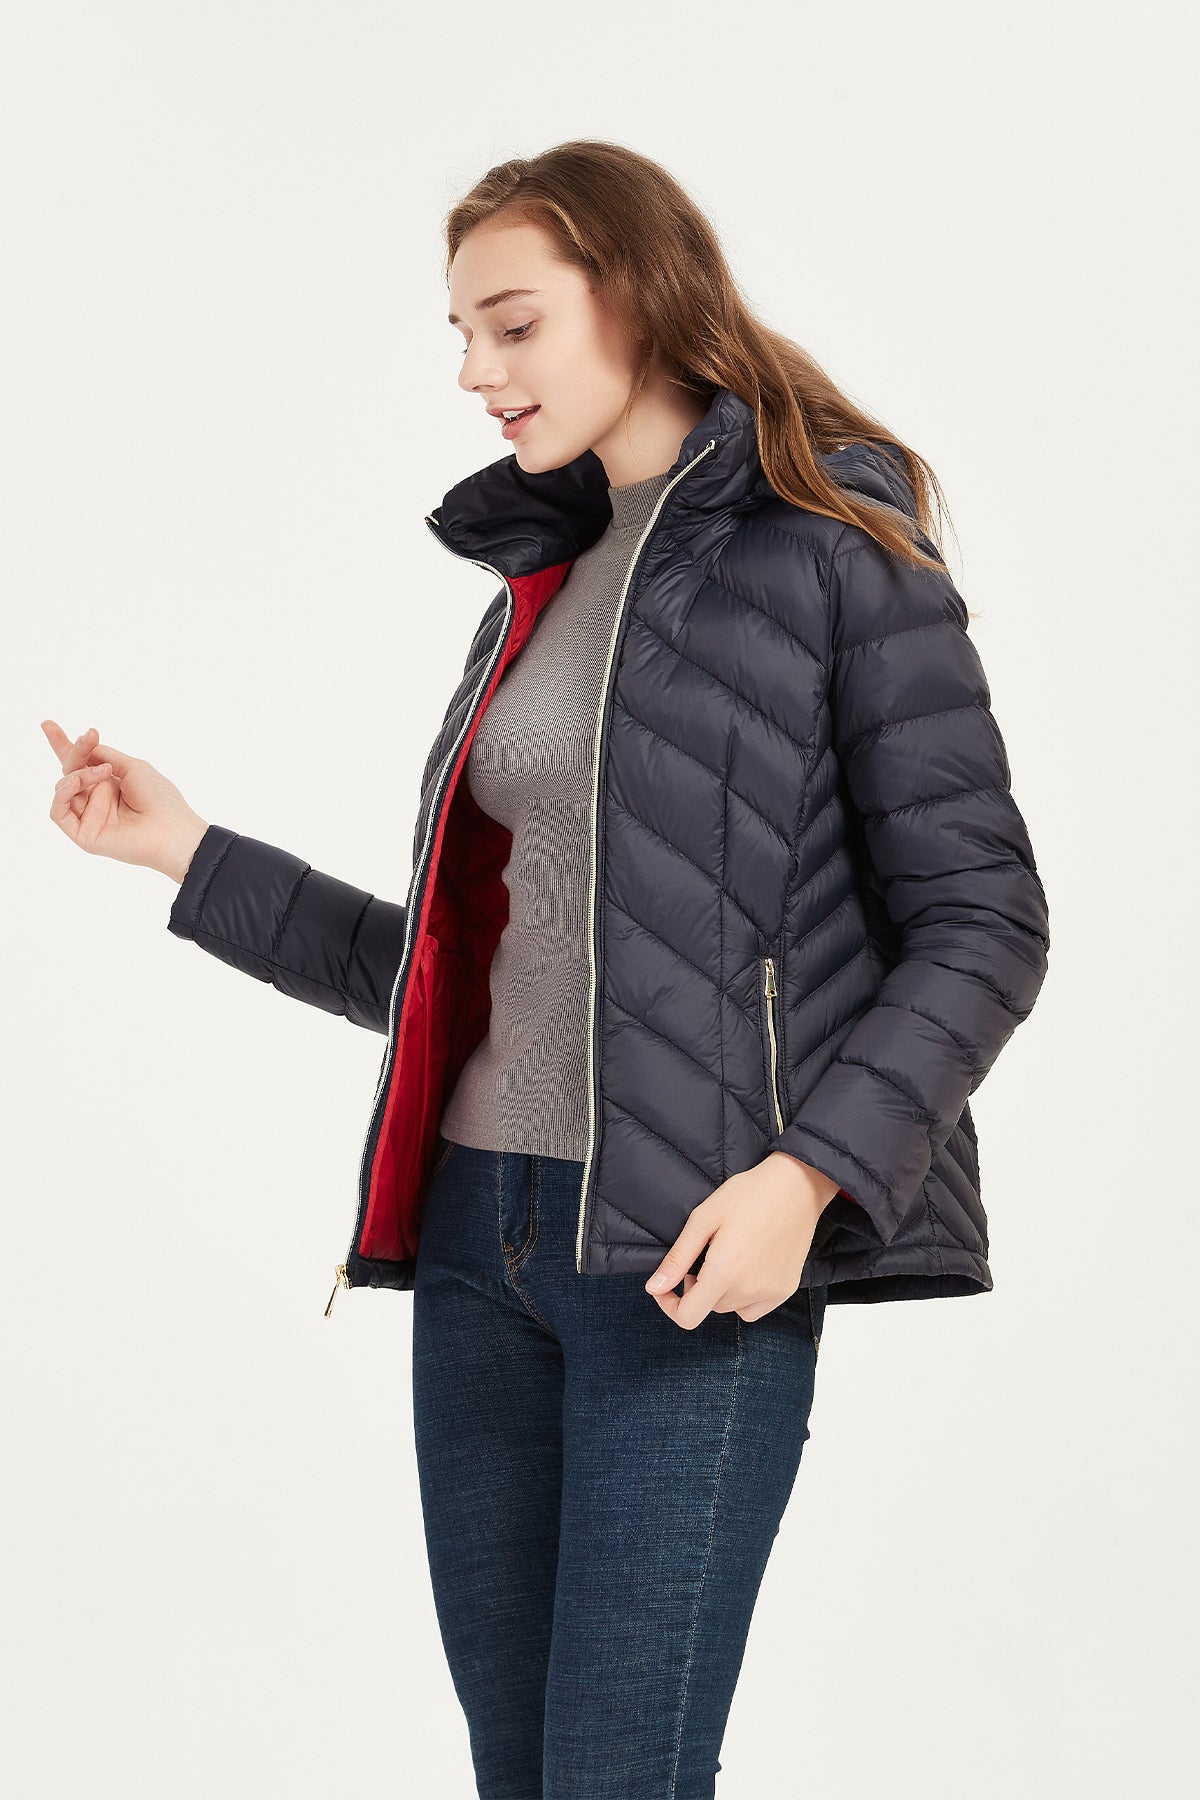 Women's Packable Lightweight quilted Winter Puffer Jacket with hood- IKAZZ